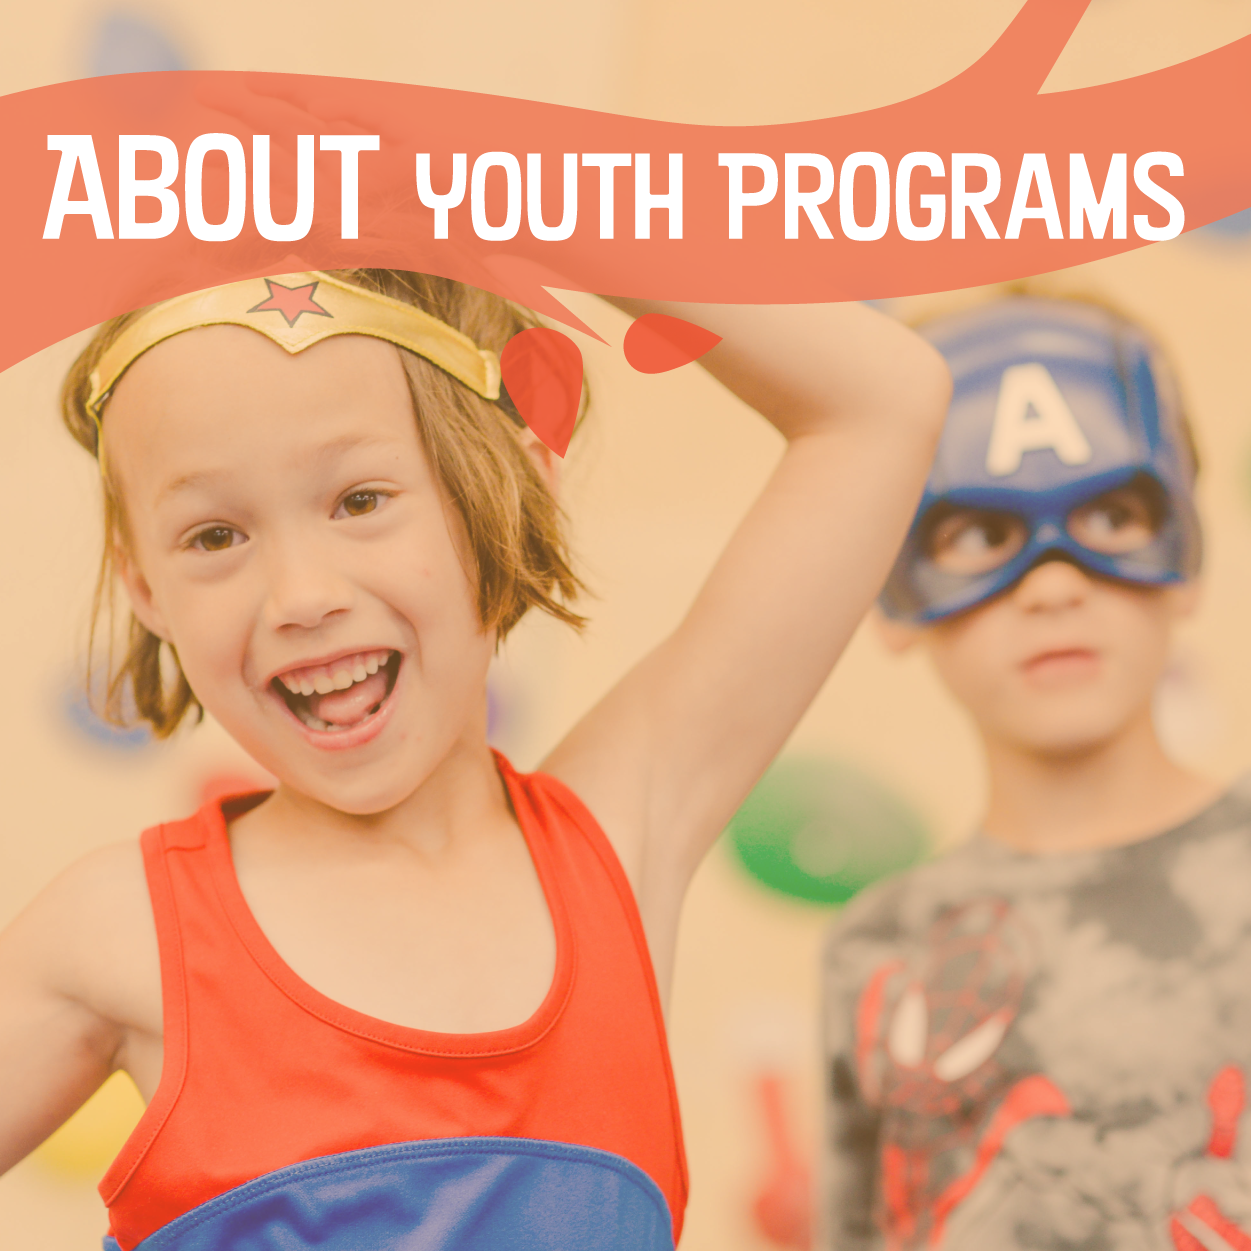 Kids at camp dressed as superheroes with text "About Youth Programs"